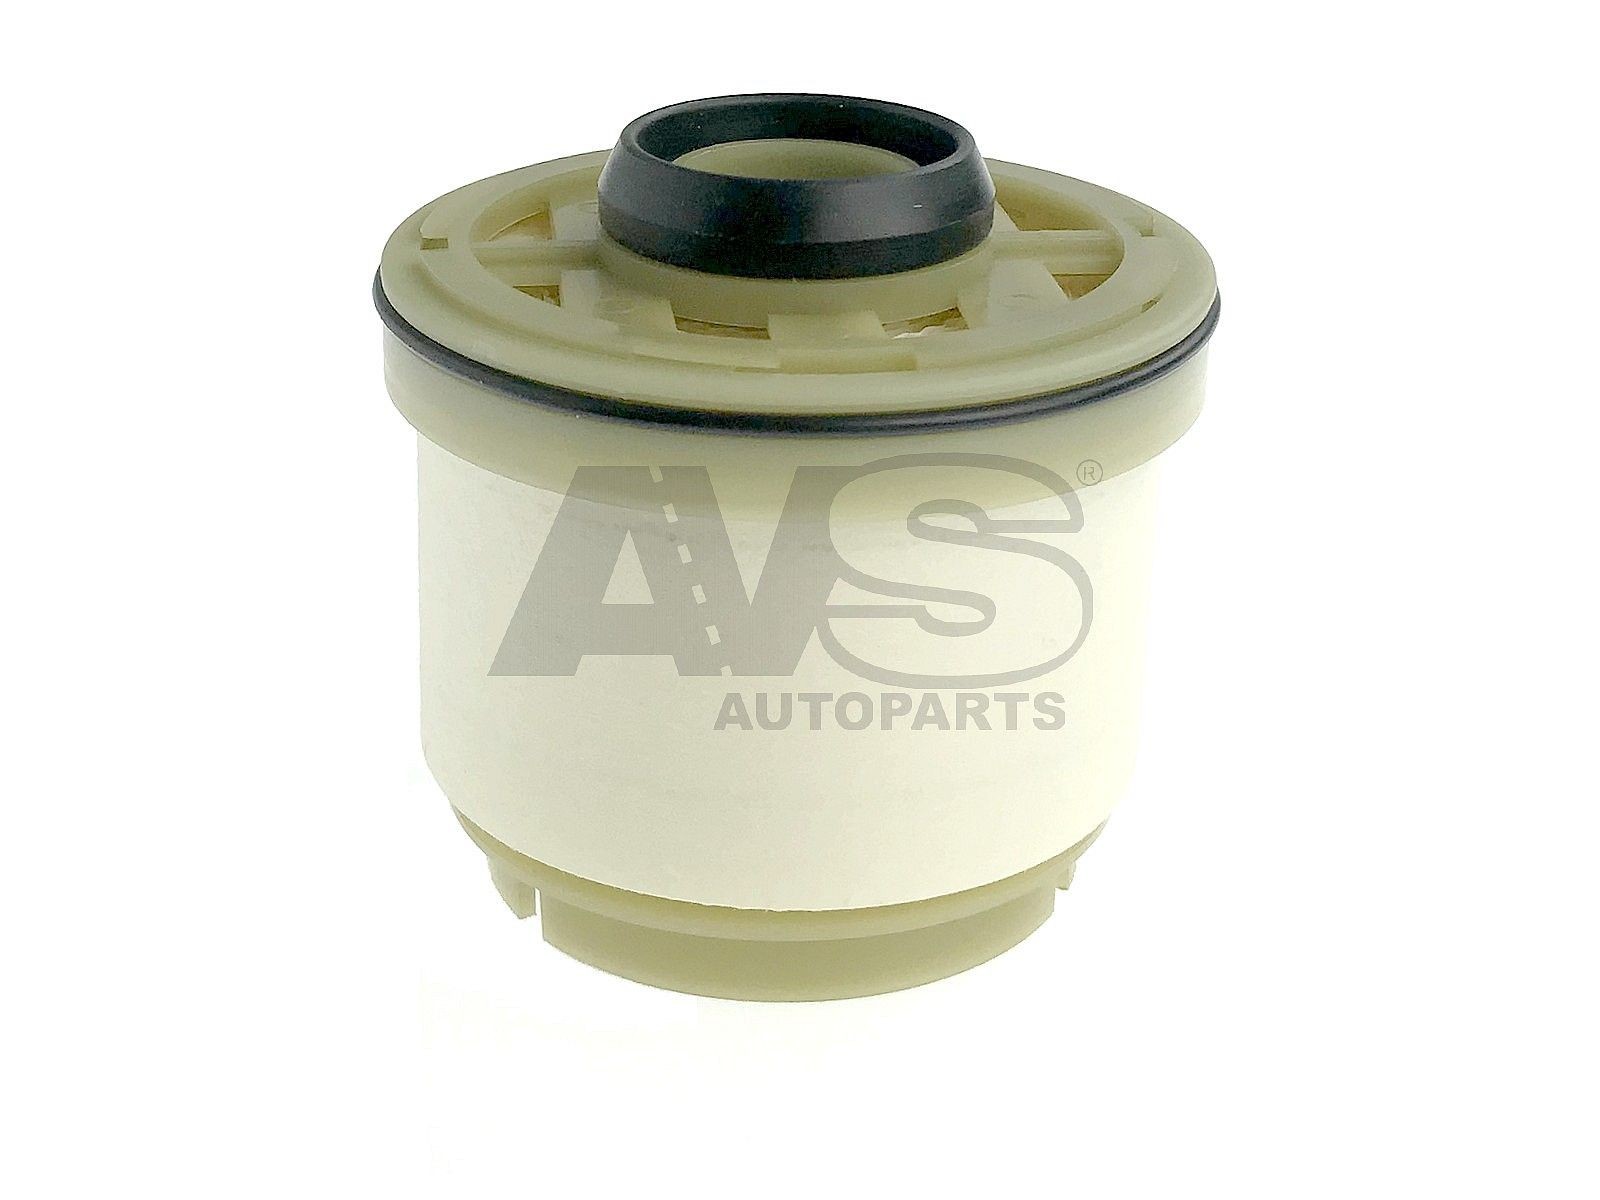 F902 Inline fuel filter AVS AUTOPARTS F902 review and test